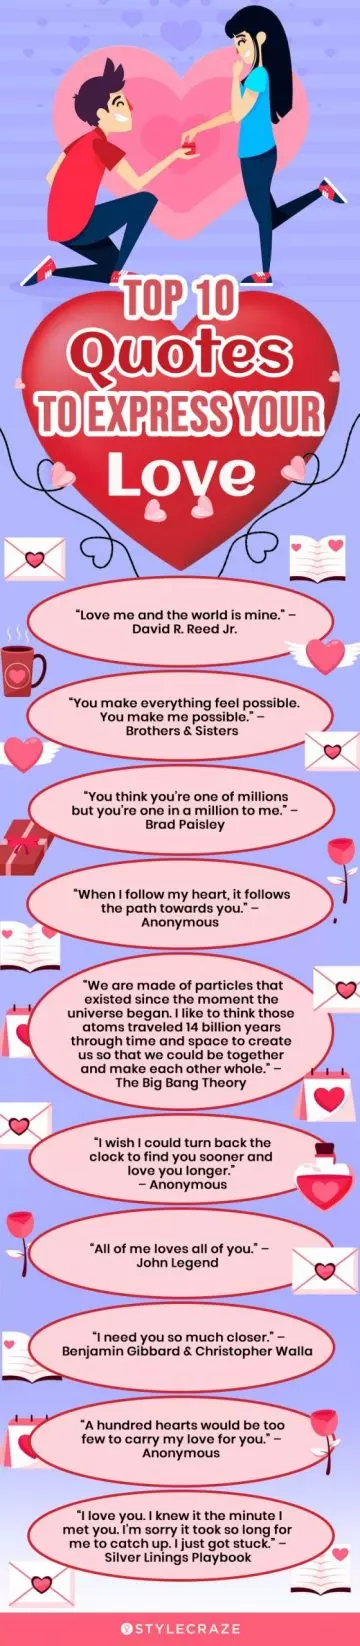 top 10 quotes to express your love (infographic)